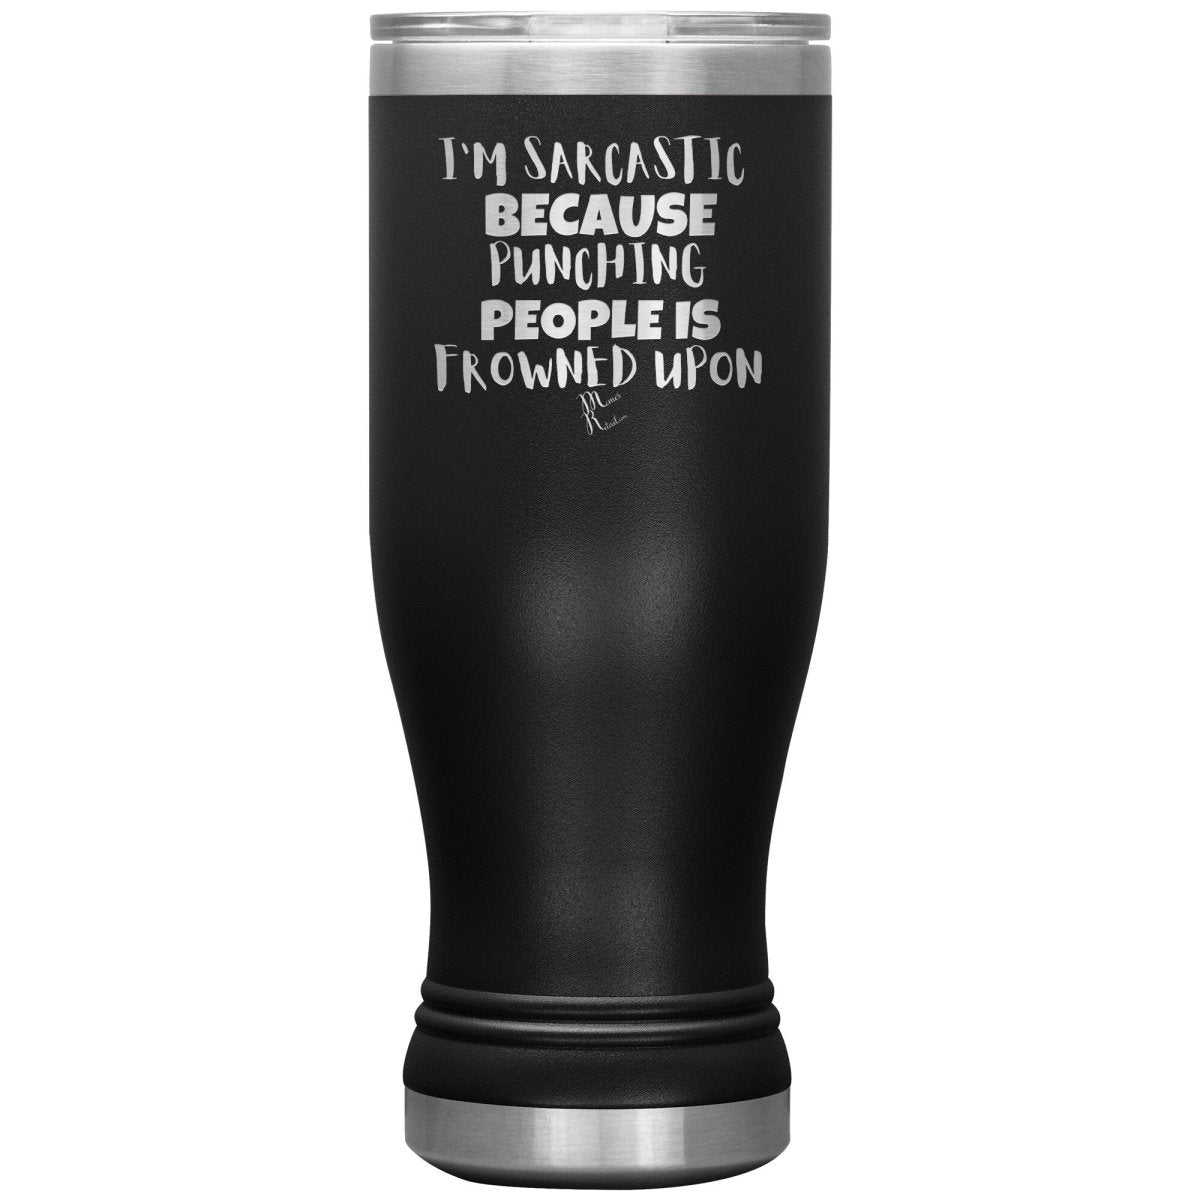 I'm Sarcastic Because Punching People is Frowned Upon Tumblers, 20oz BOHO Insulated Tumbler / Black - MemesRetail.com